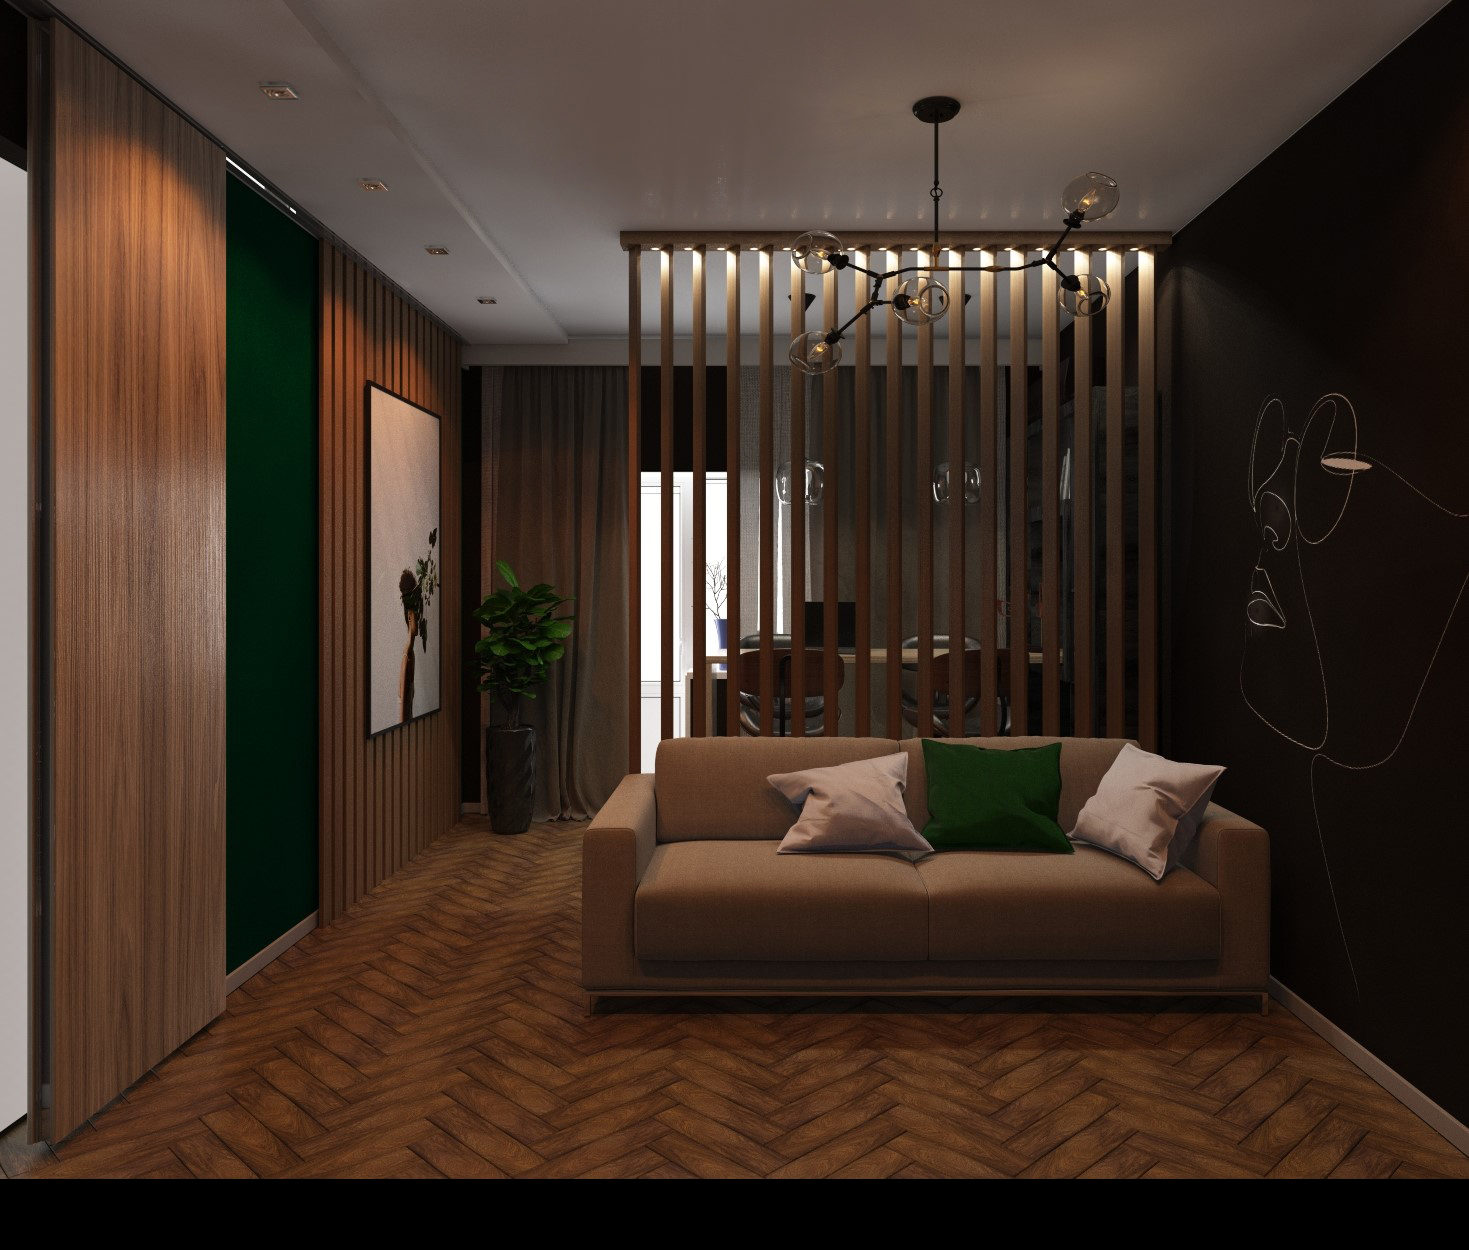 Interior living room in 3d max vray 3.0 image